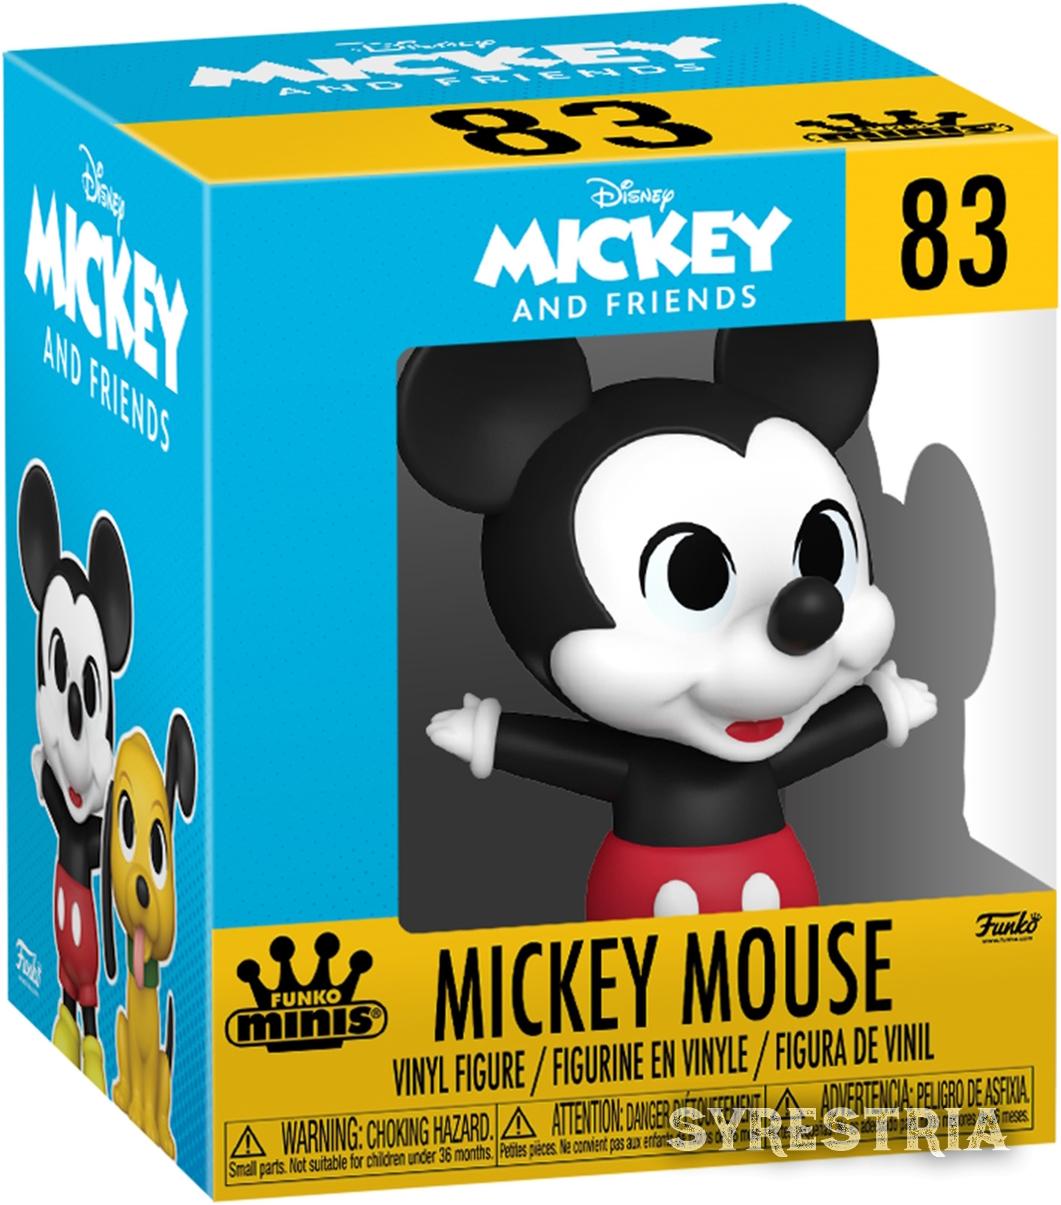 Disney Mickey and Frinds - Mickey Mouse 83 - Funko Minis Vynl Figuren